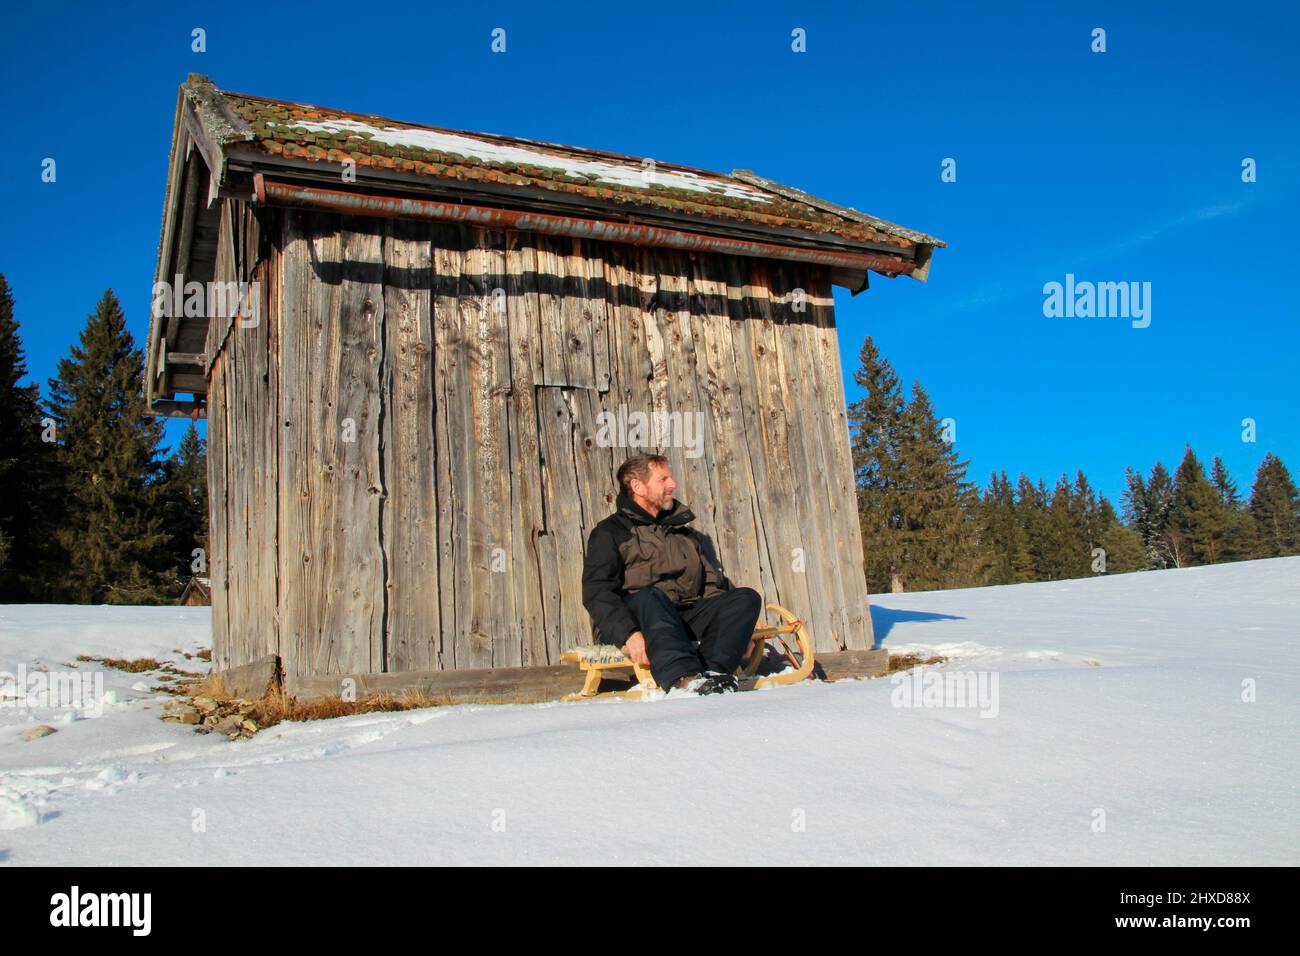 Man on winter hike near Mittenwald, sledge in front of mountain scenery in snow, Bavaria, Upper Bavaria, Germany, vacation, winter, Stock Photo